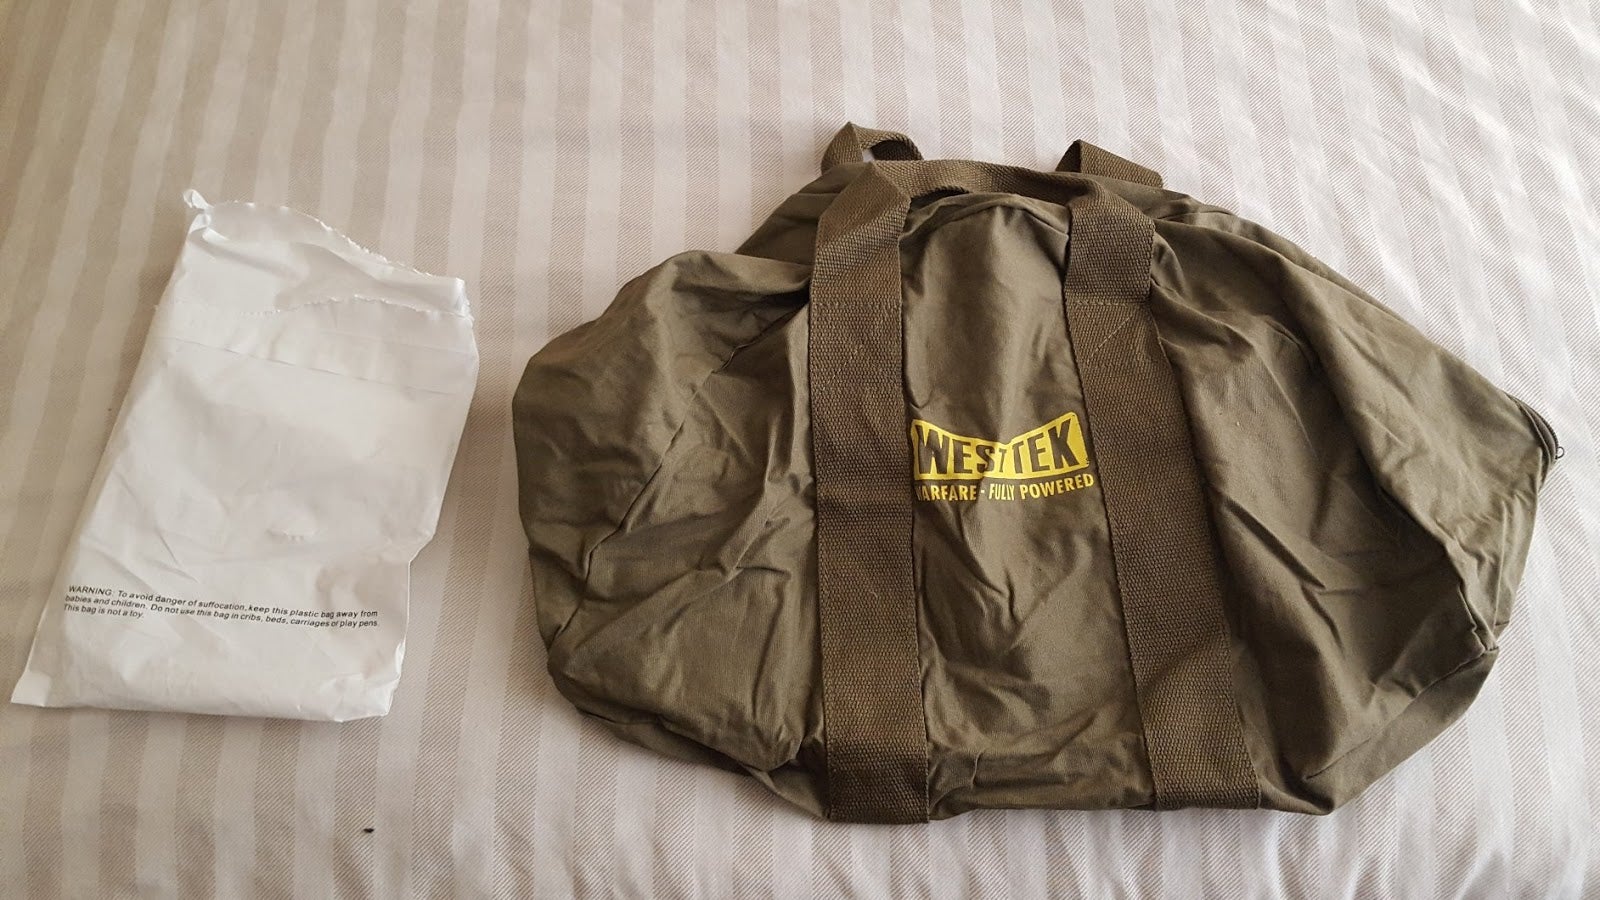 At Long Last, The Canvas Fallout 76 Bags Have Arrived